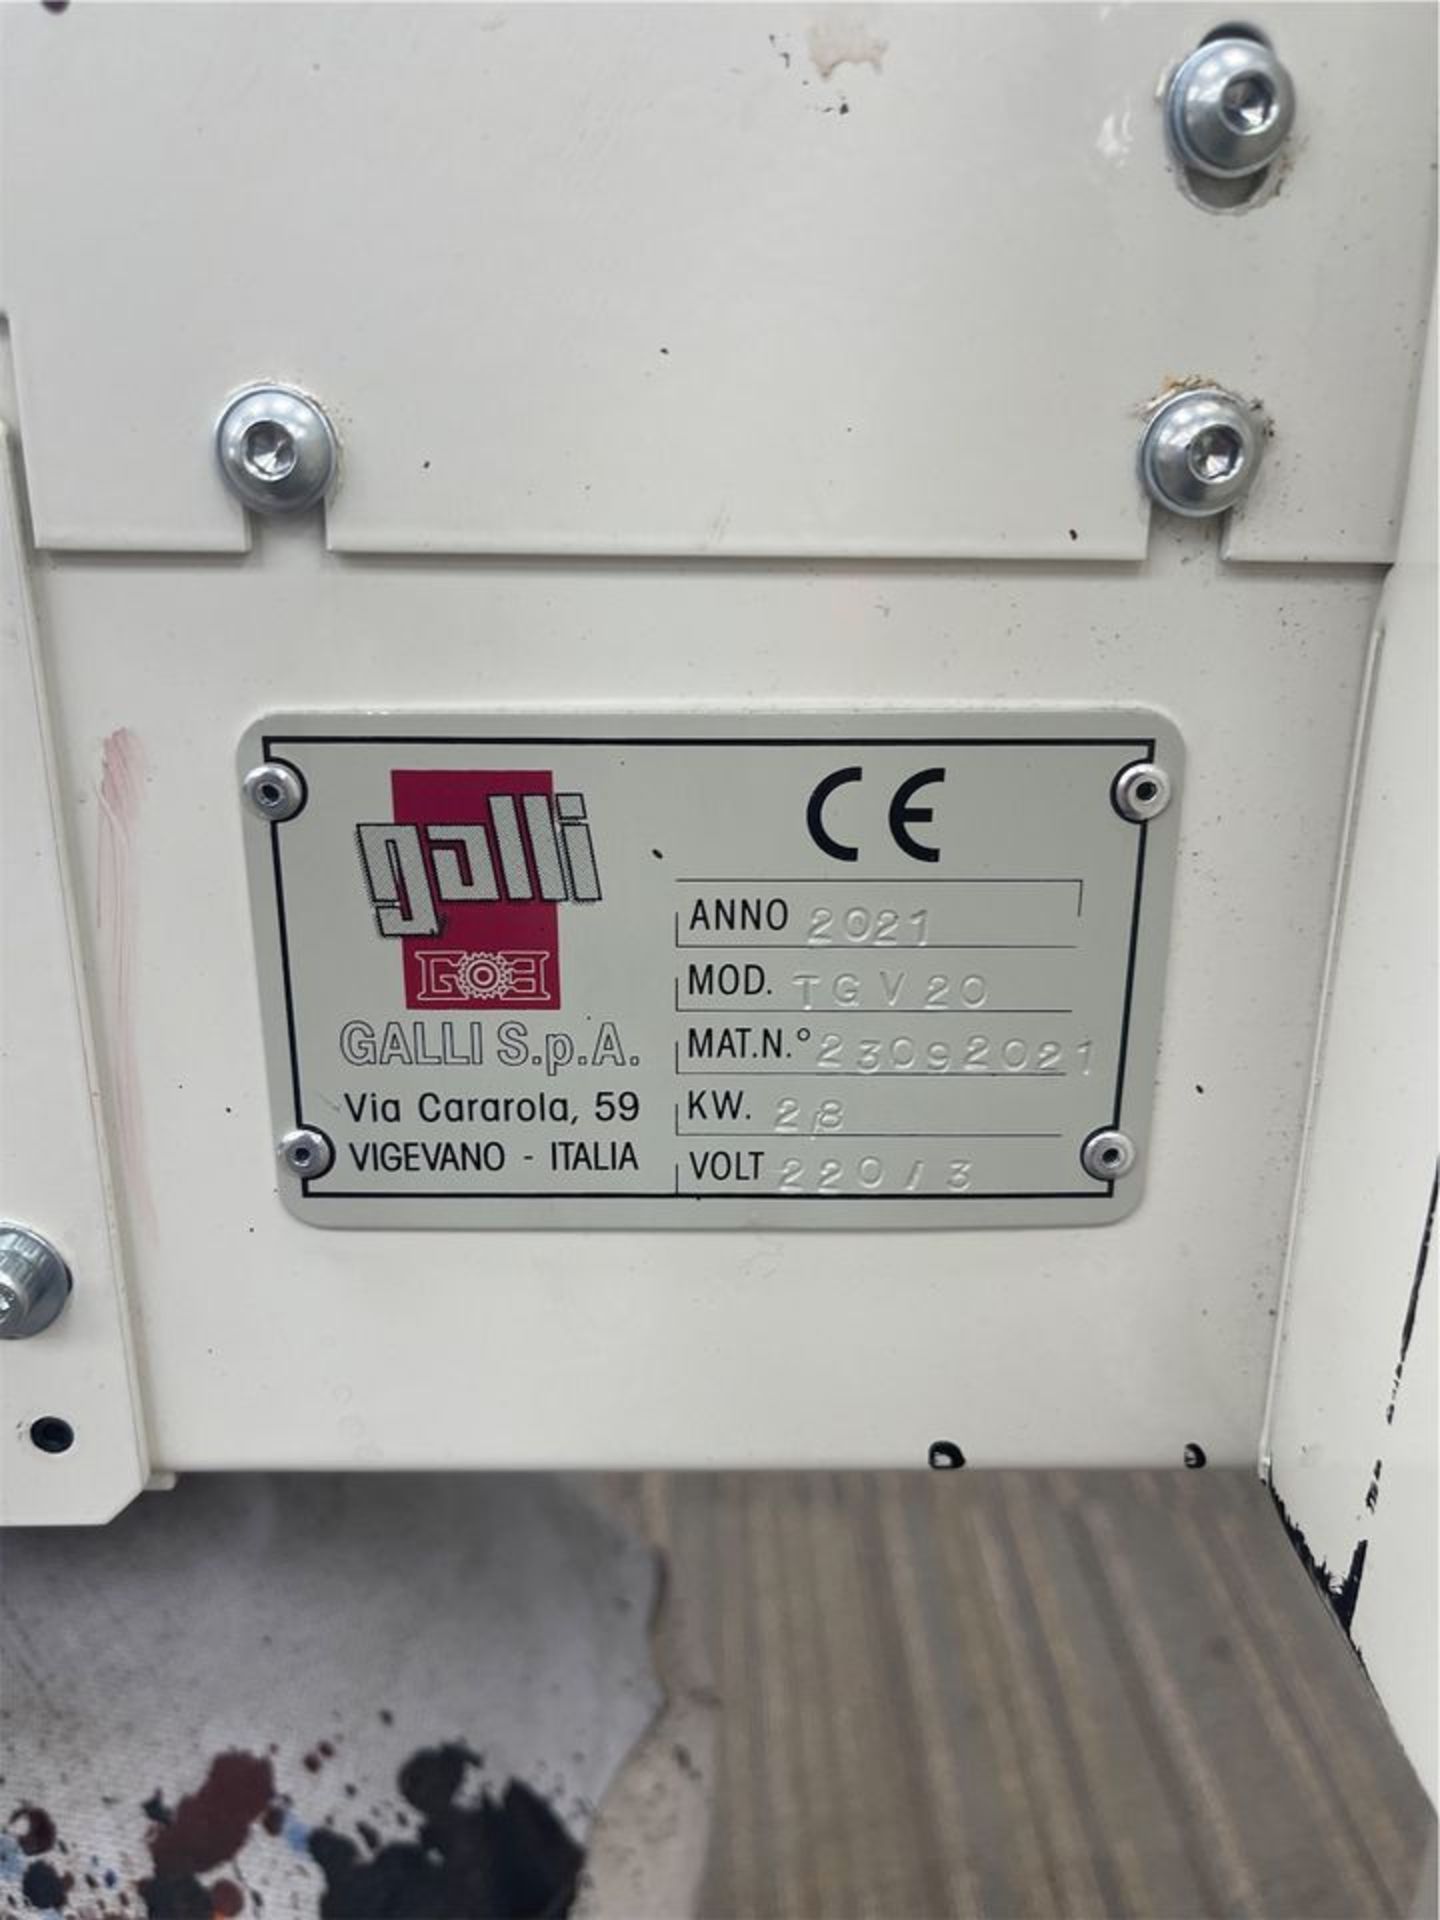 Galli 4 in. x 66 in. Model TGV 20 Automatic Conveyorized Drying Tunnel, S/N: 23092021 (2021); 1500 C - Image 5 of 6